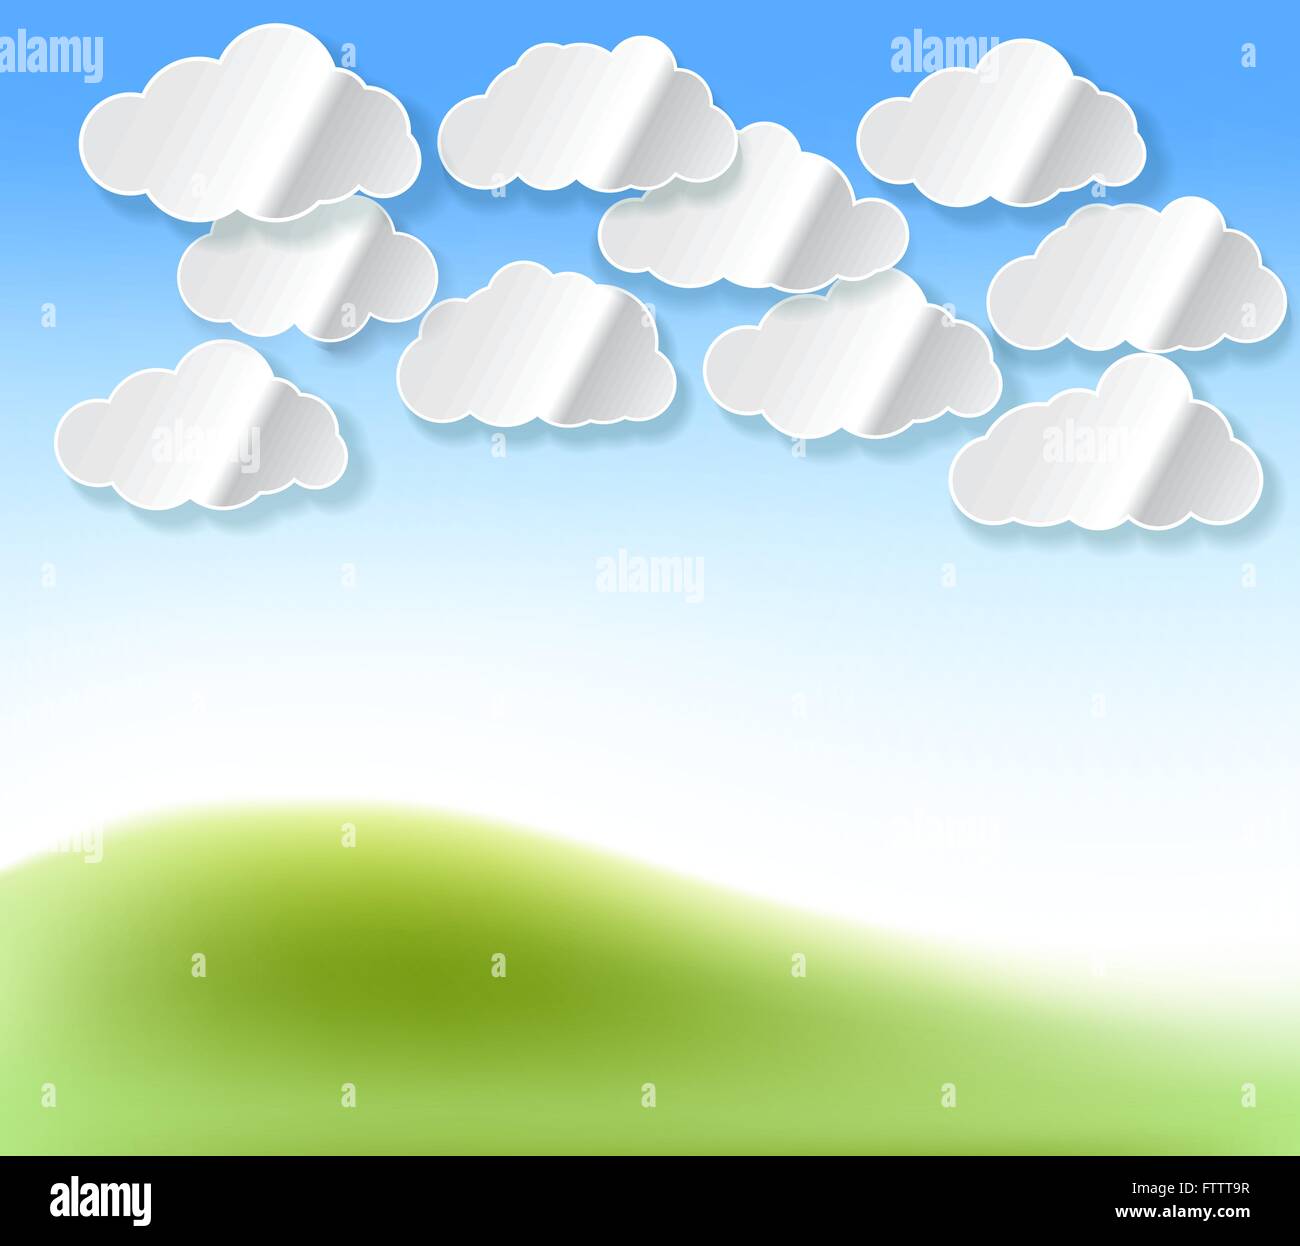 Paper white clouds with shadow abstract background with sky and grass color. Vector design template Stock Vector